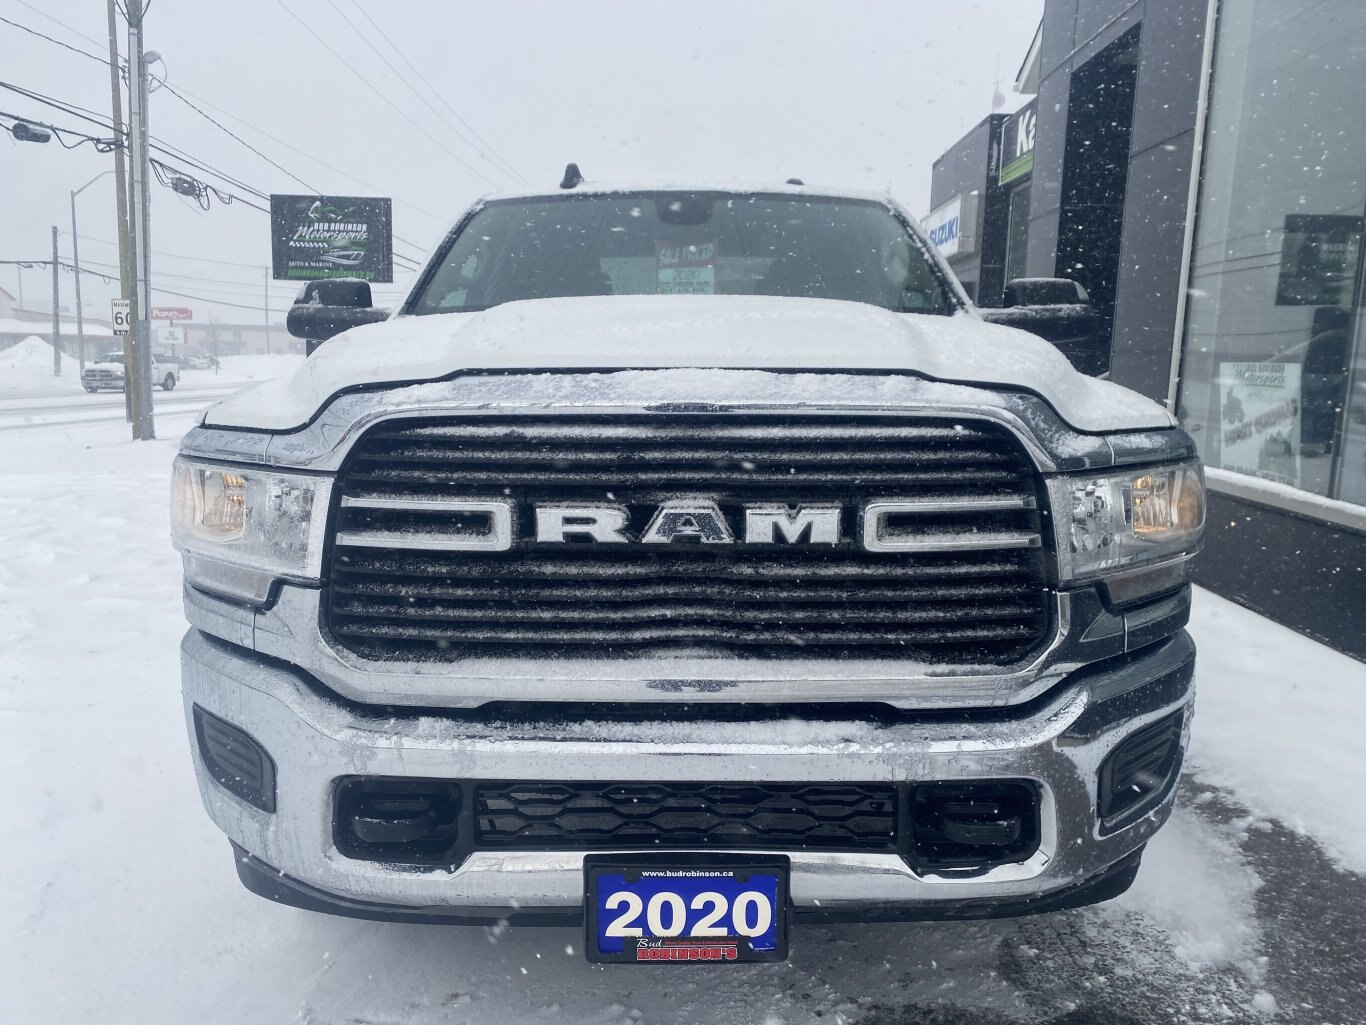 2020 DODGE RAM 2500 HD BIG HORN 4X4 CREW CAB WITH REAR VIEW CAMERA!!